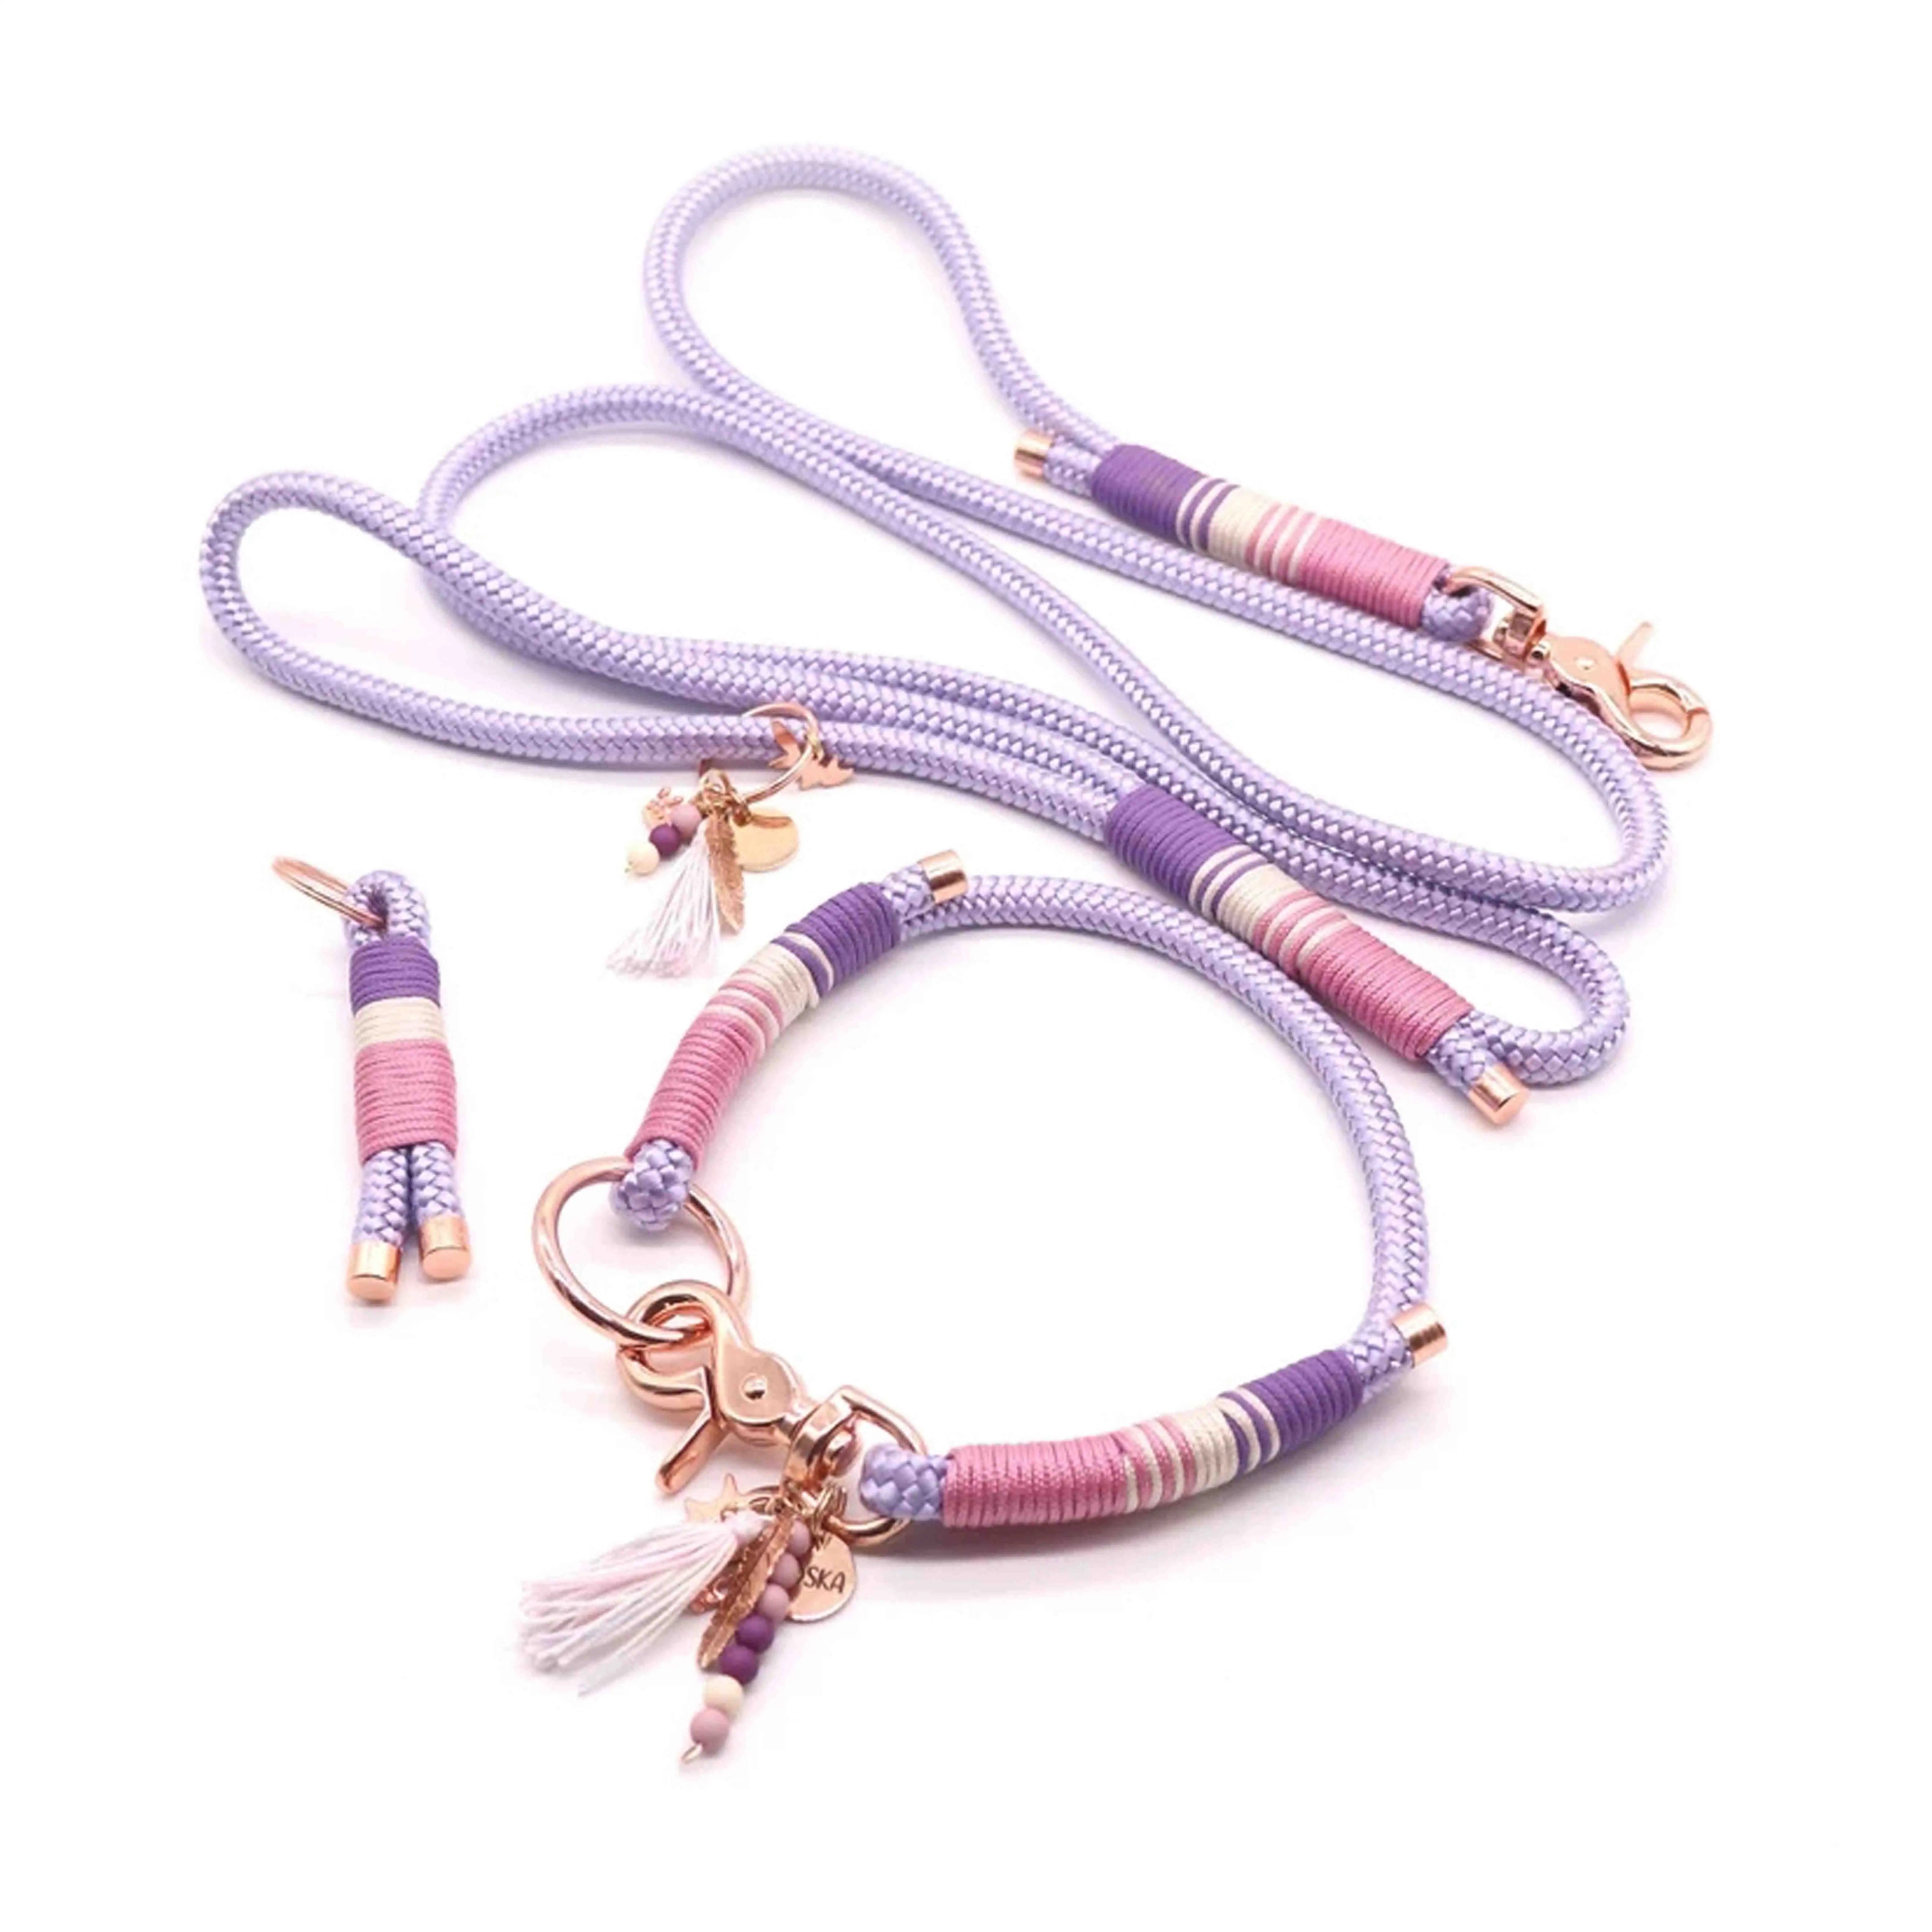 Custom Personalized handmade handsfree S M L size of training rope dog leash and collar set polyester dog leash